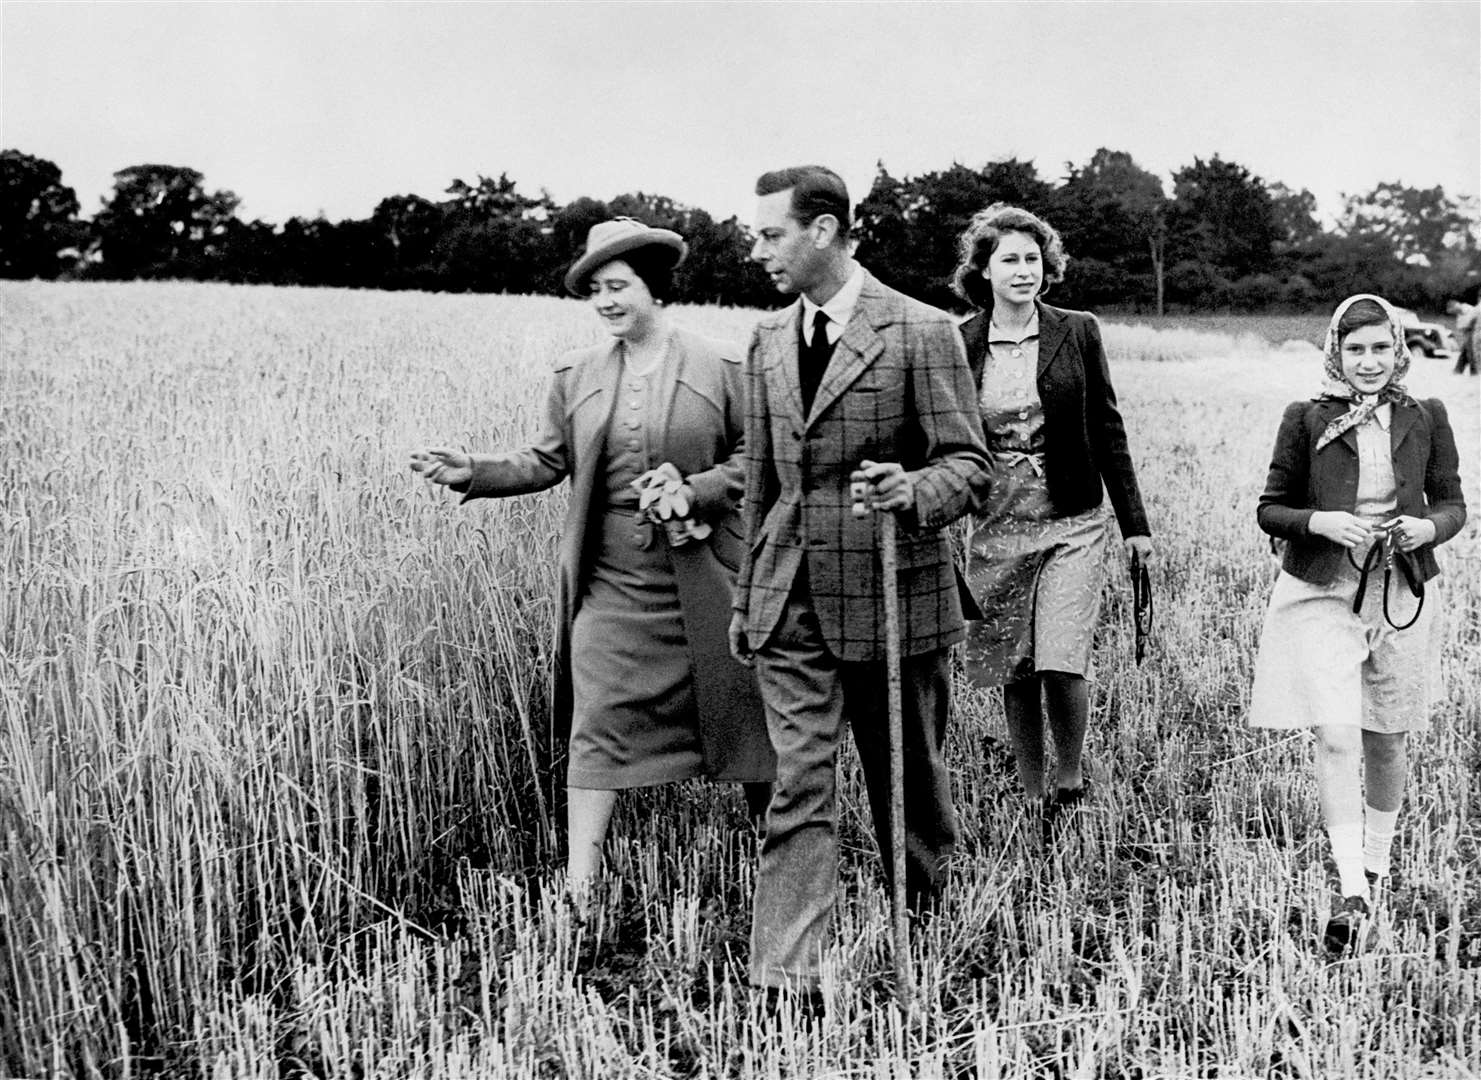 King George VI and Queen Elizabeth walk in a field with their daughters Princess Elizabeth and Princess Margaret in 1941 during the war (PA)